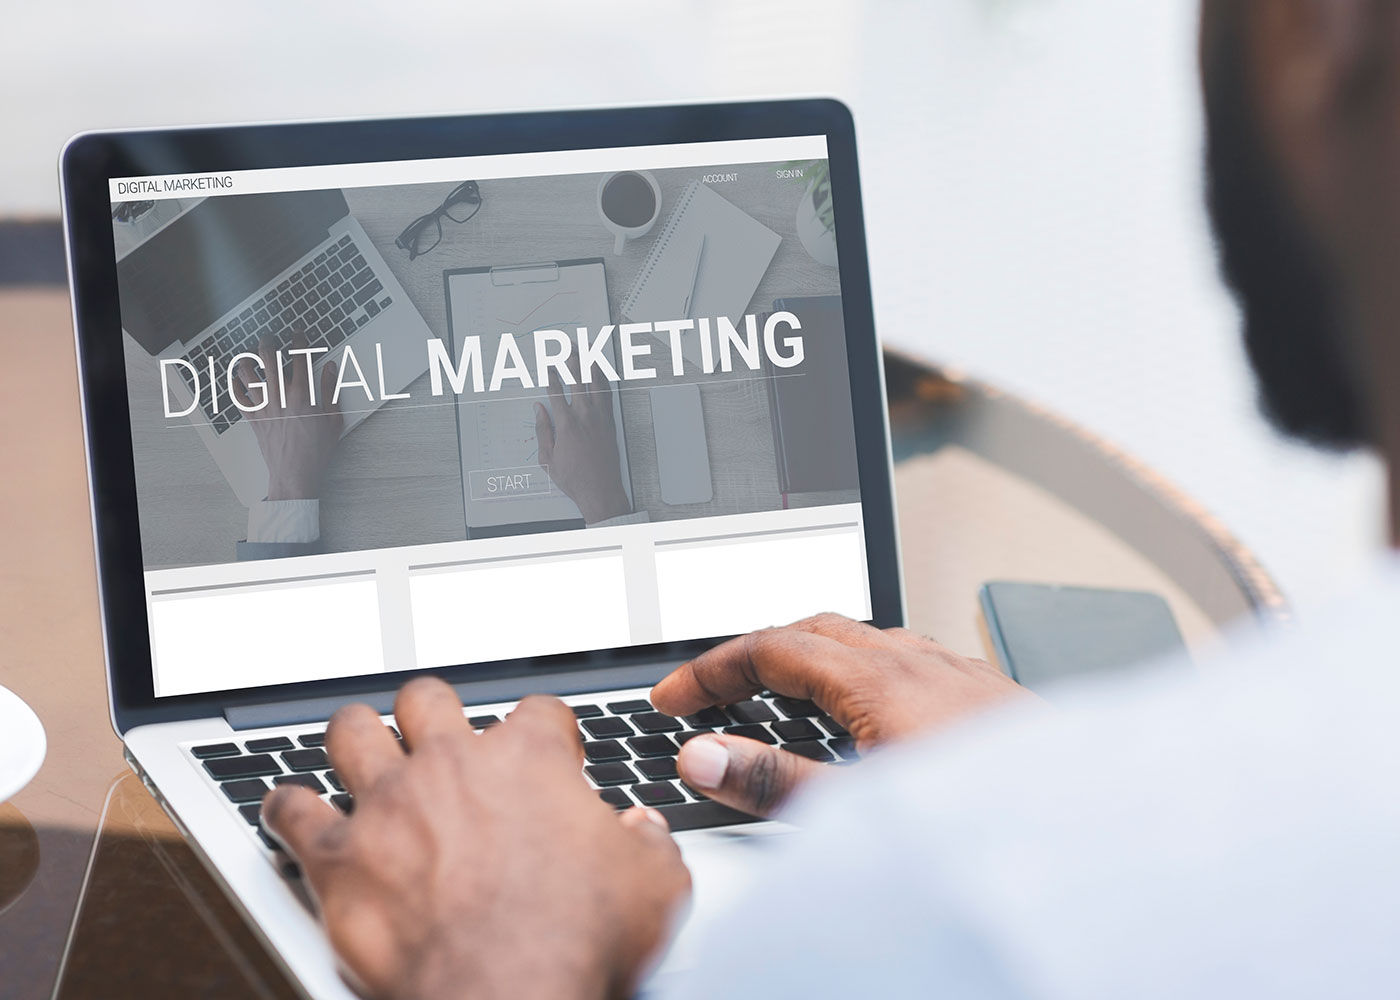 What They Don't Teach in School about Digital Marketing